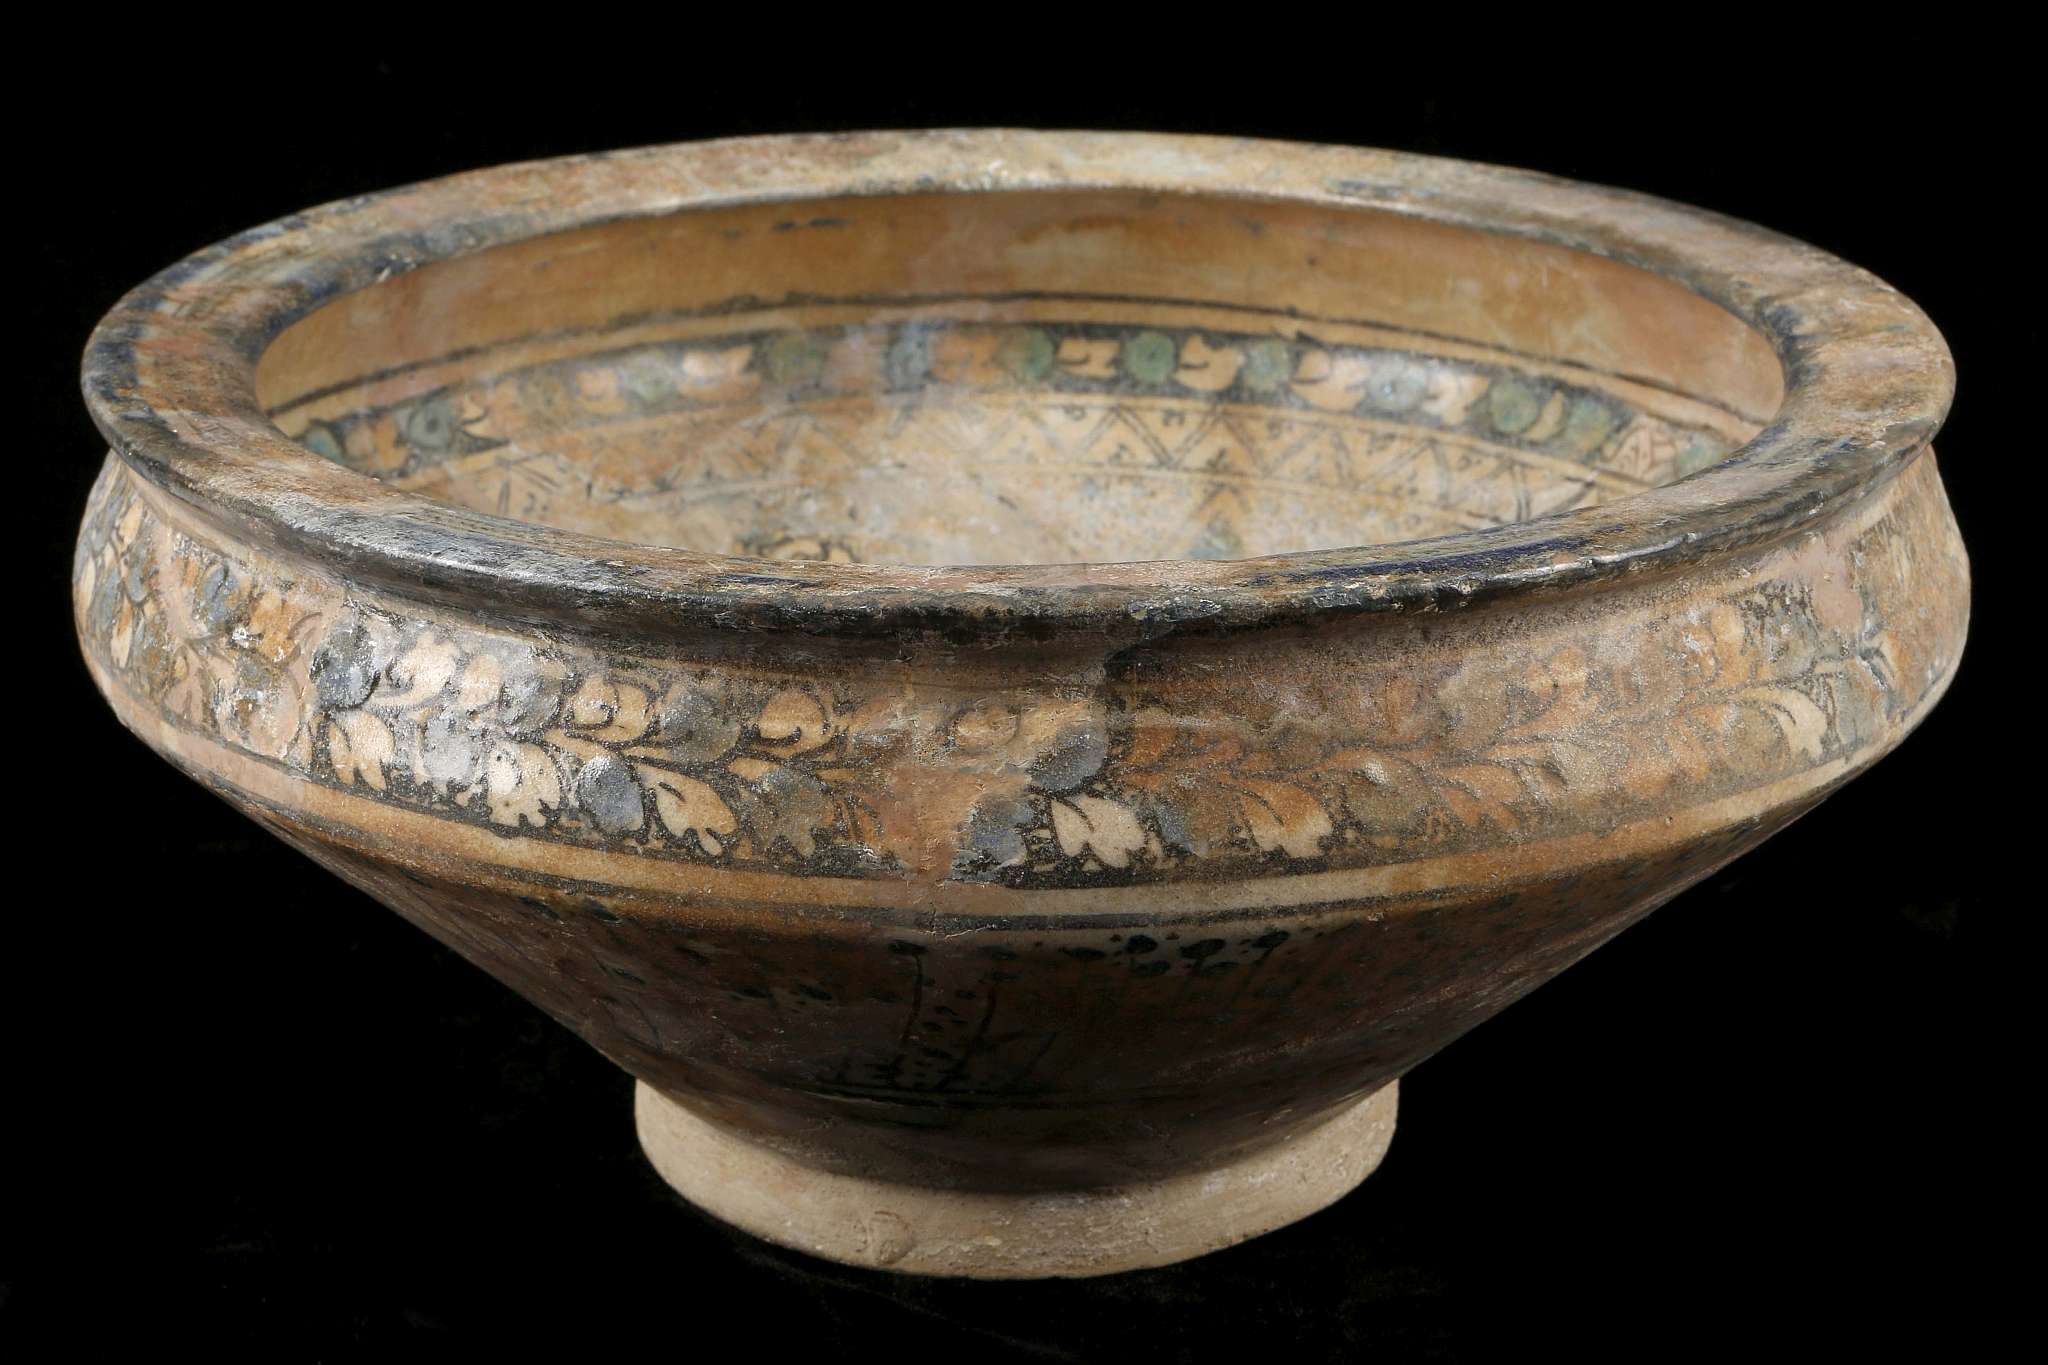 A LARGE KASHAN POTTERY BOWL, 13th or early 14th century, Central Iran, of conical form with a flat